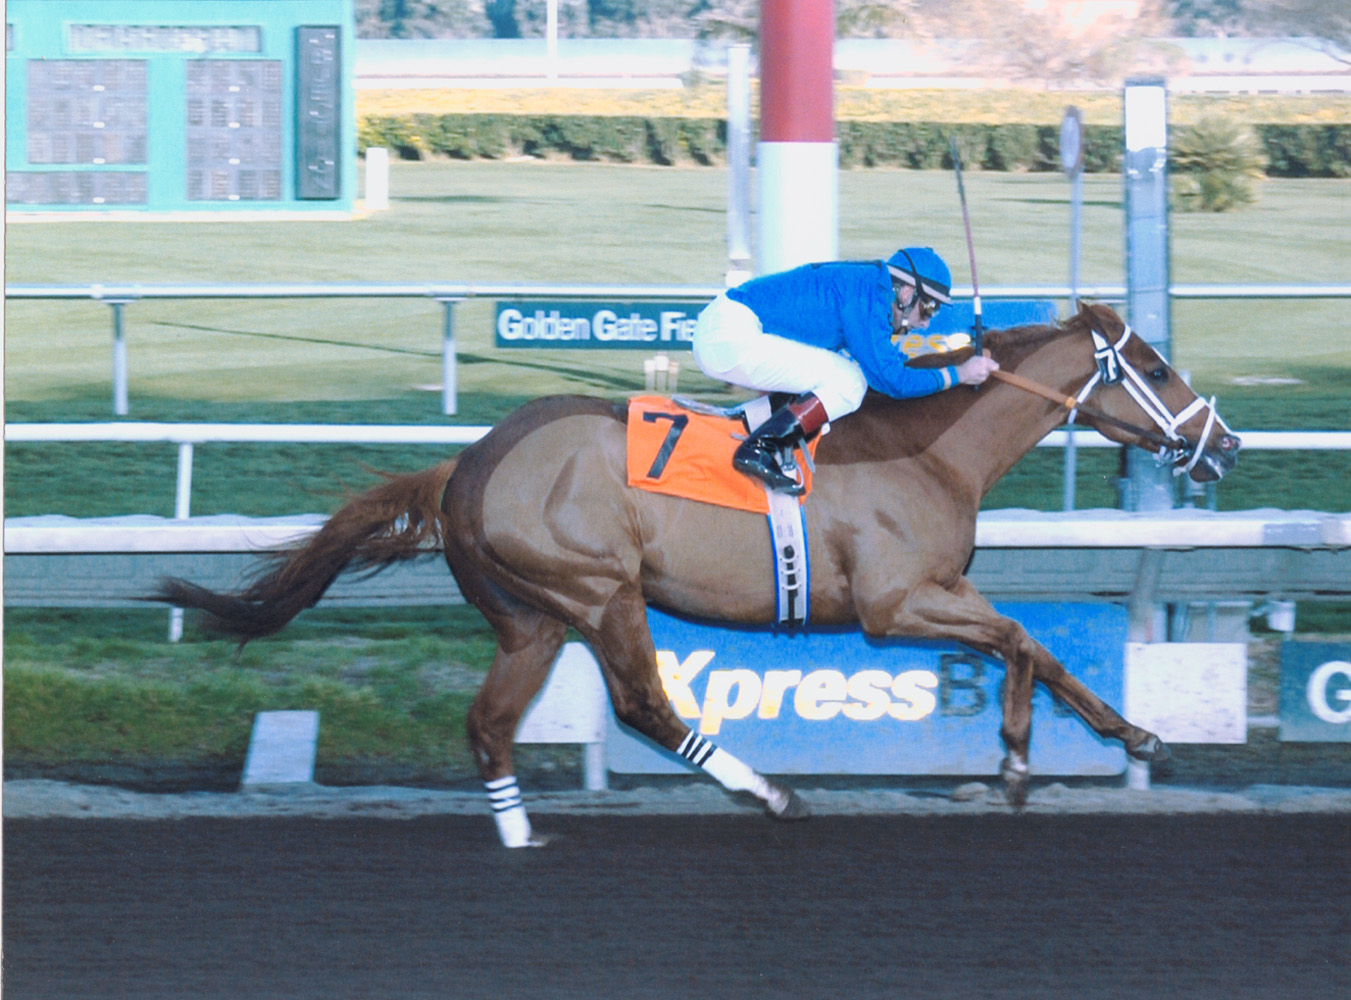 Russell Baze winning his 8,834th career race aboard Hollow Memories to surpass Bill Shoemaker and reach 2nd place on the all-time wins list for jockeys (Golden Gate Fields Photo/Museum Collection)